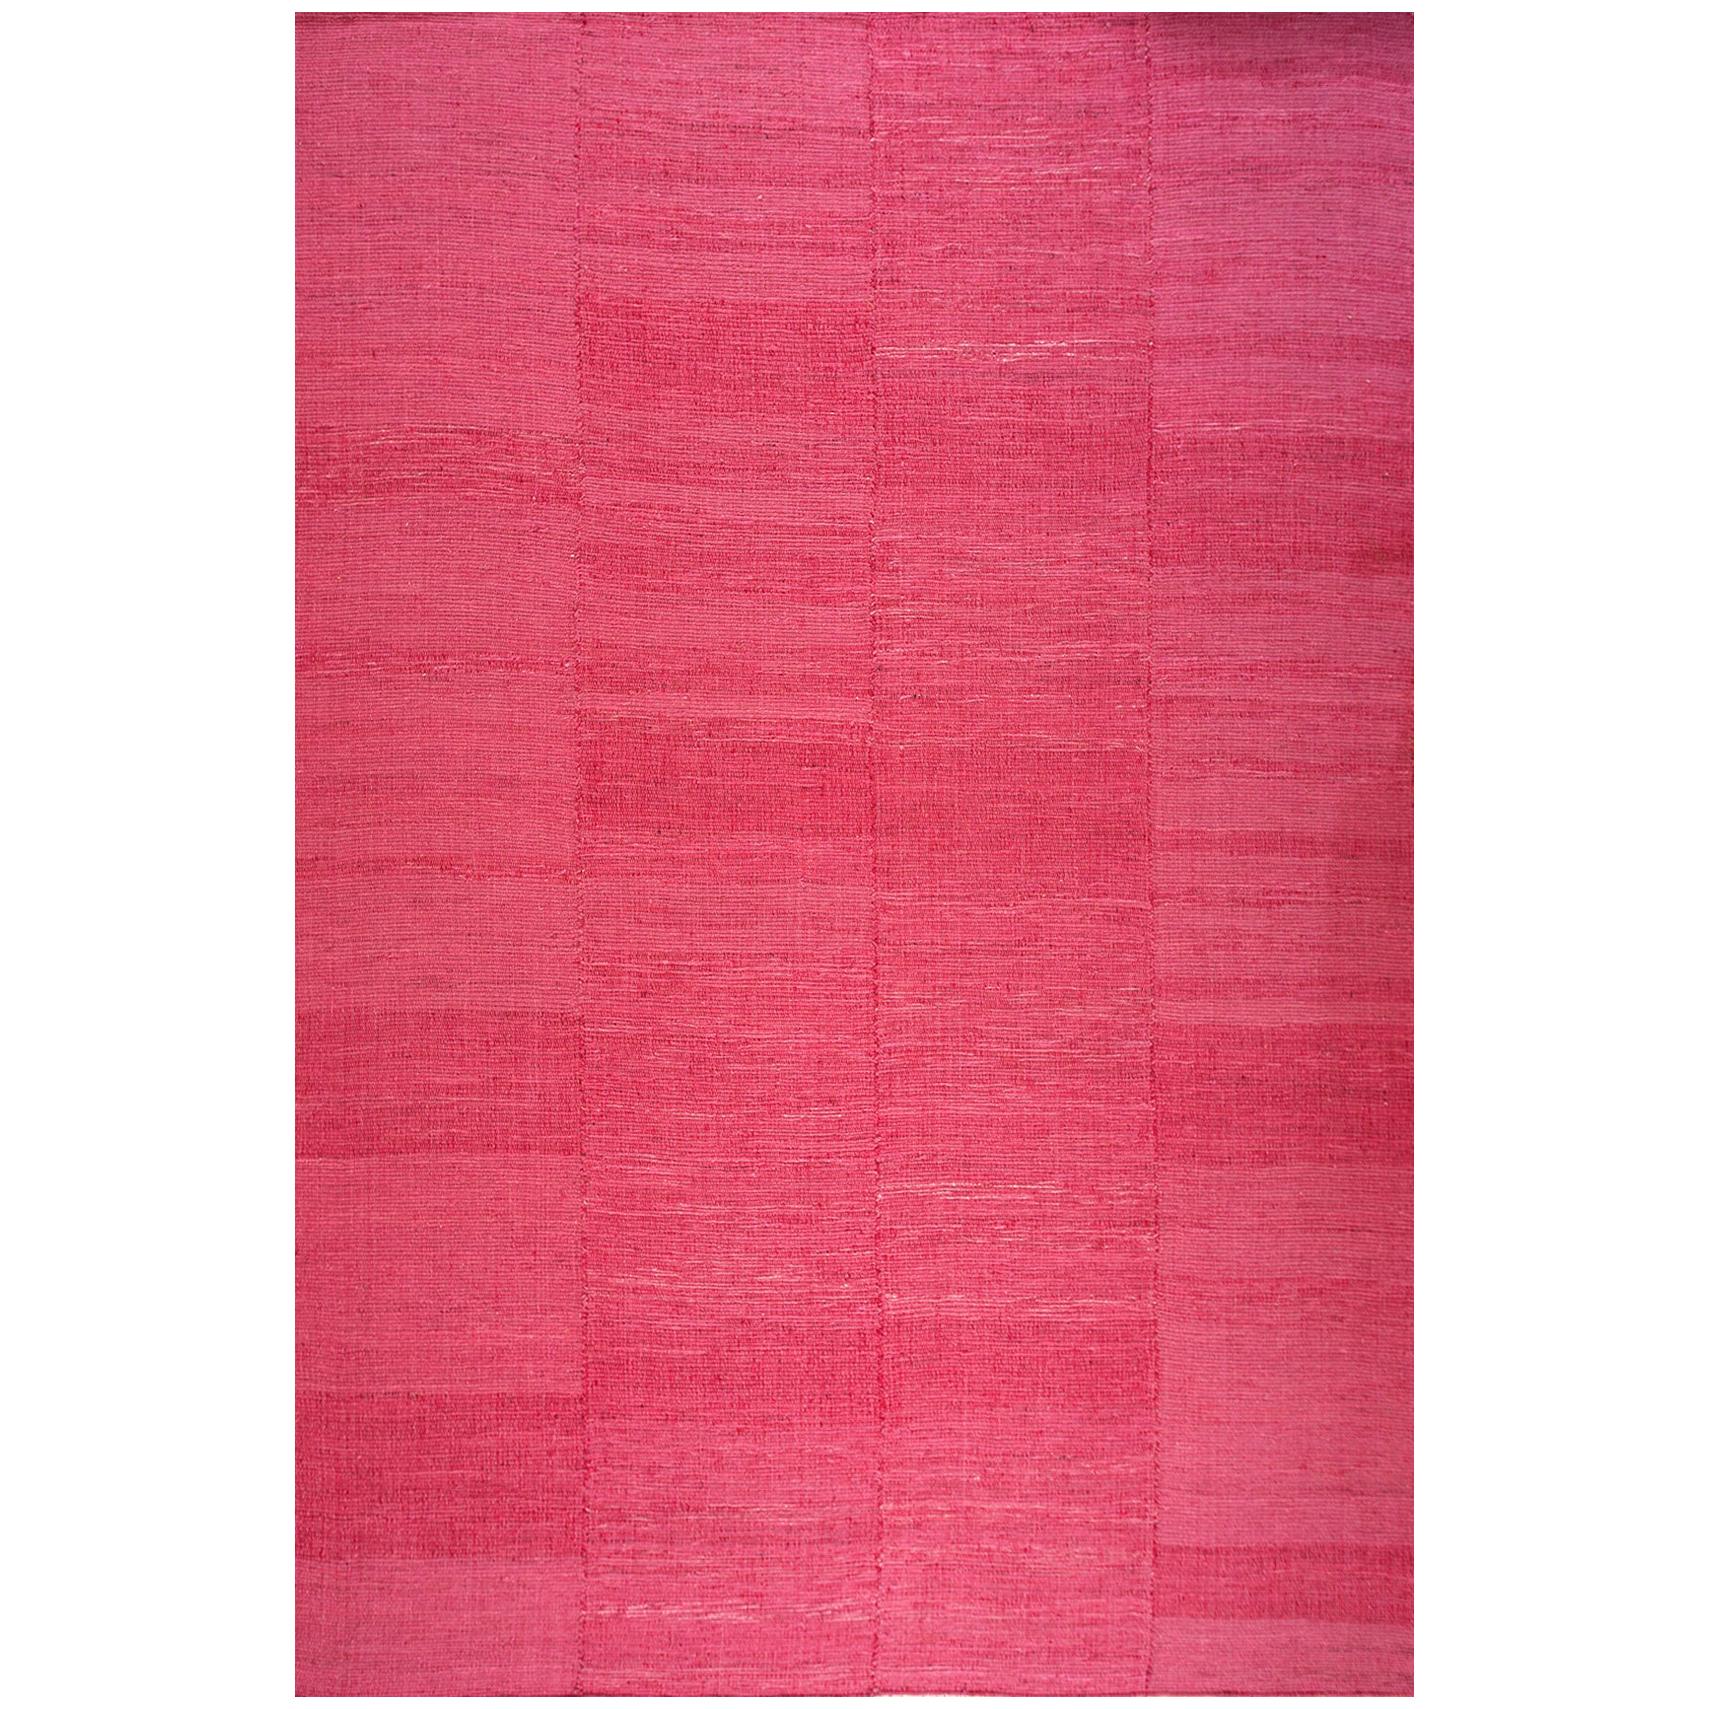 Contemporary Shaker Style Flat-Weave Carpet ( 10' x 14' 2" - 305 x 432 cm ) For Sale